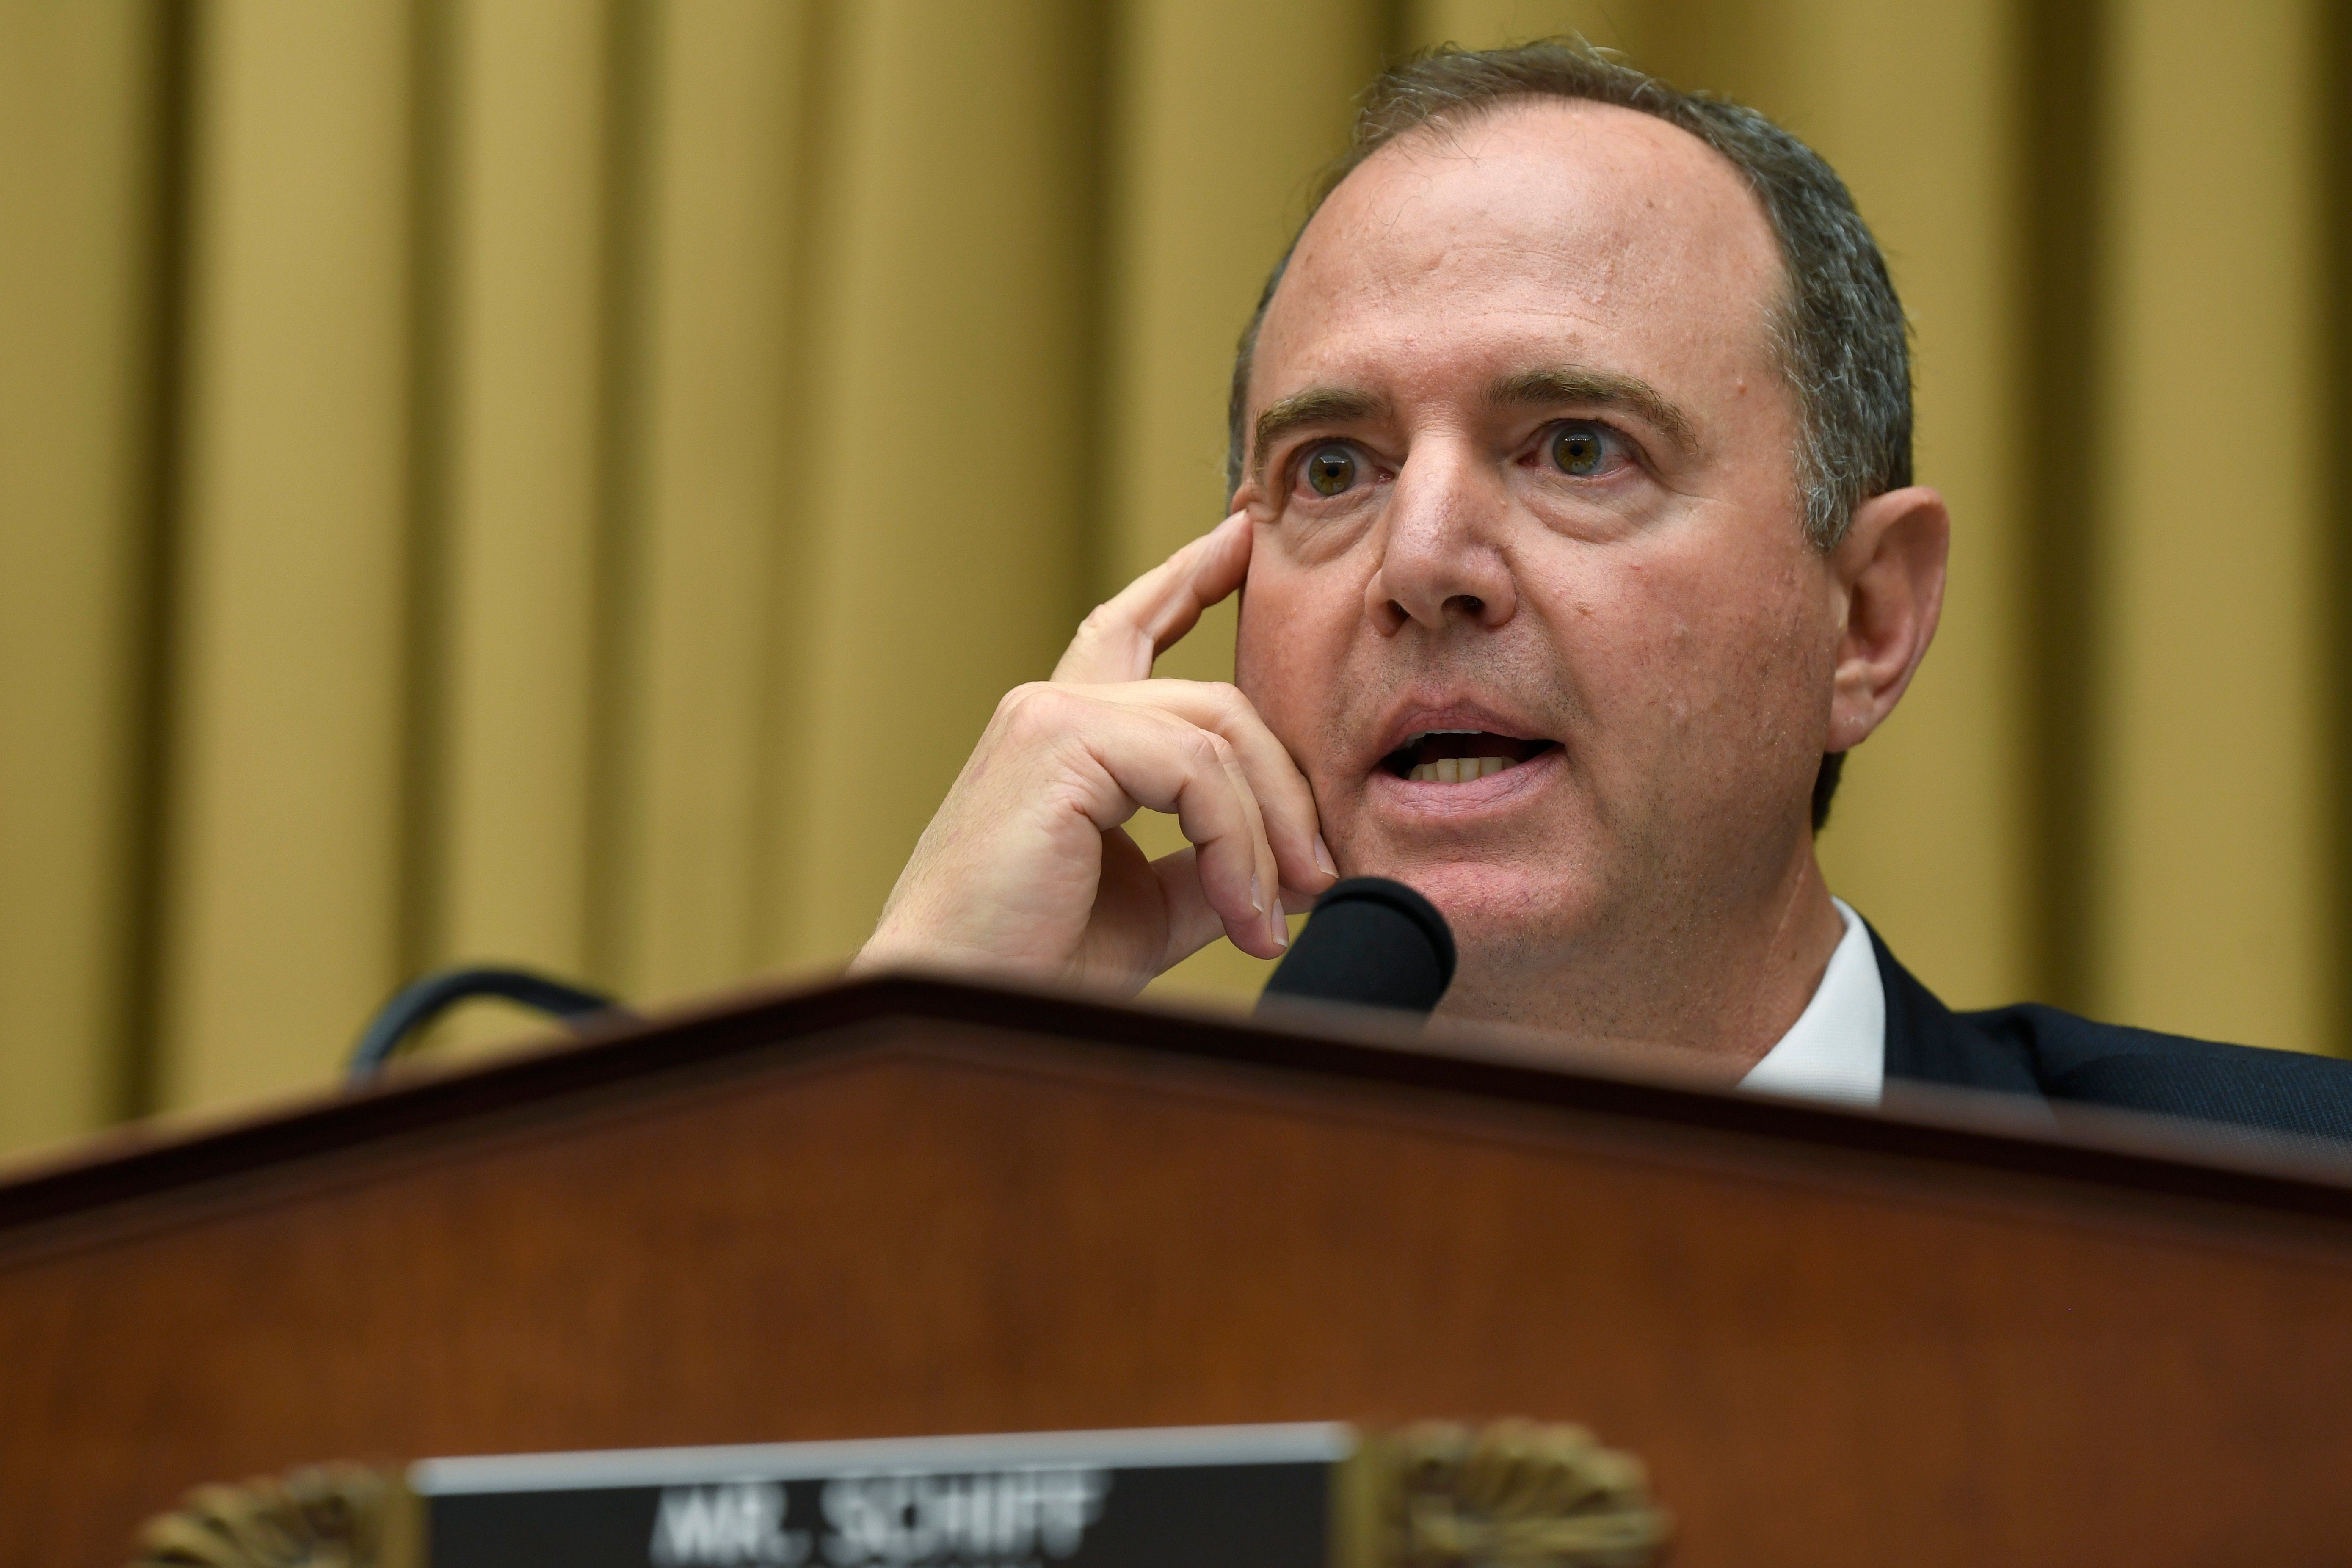 House Intelligence Committee Chairman, Democratic Congressmen Adam Schiff, questions former special counsel Robert Mueller as he testifies before the committee on his report on Russian election interference, on Capitol Hill, in Washington, July 24, 2019. 